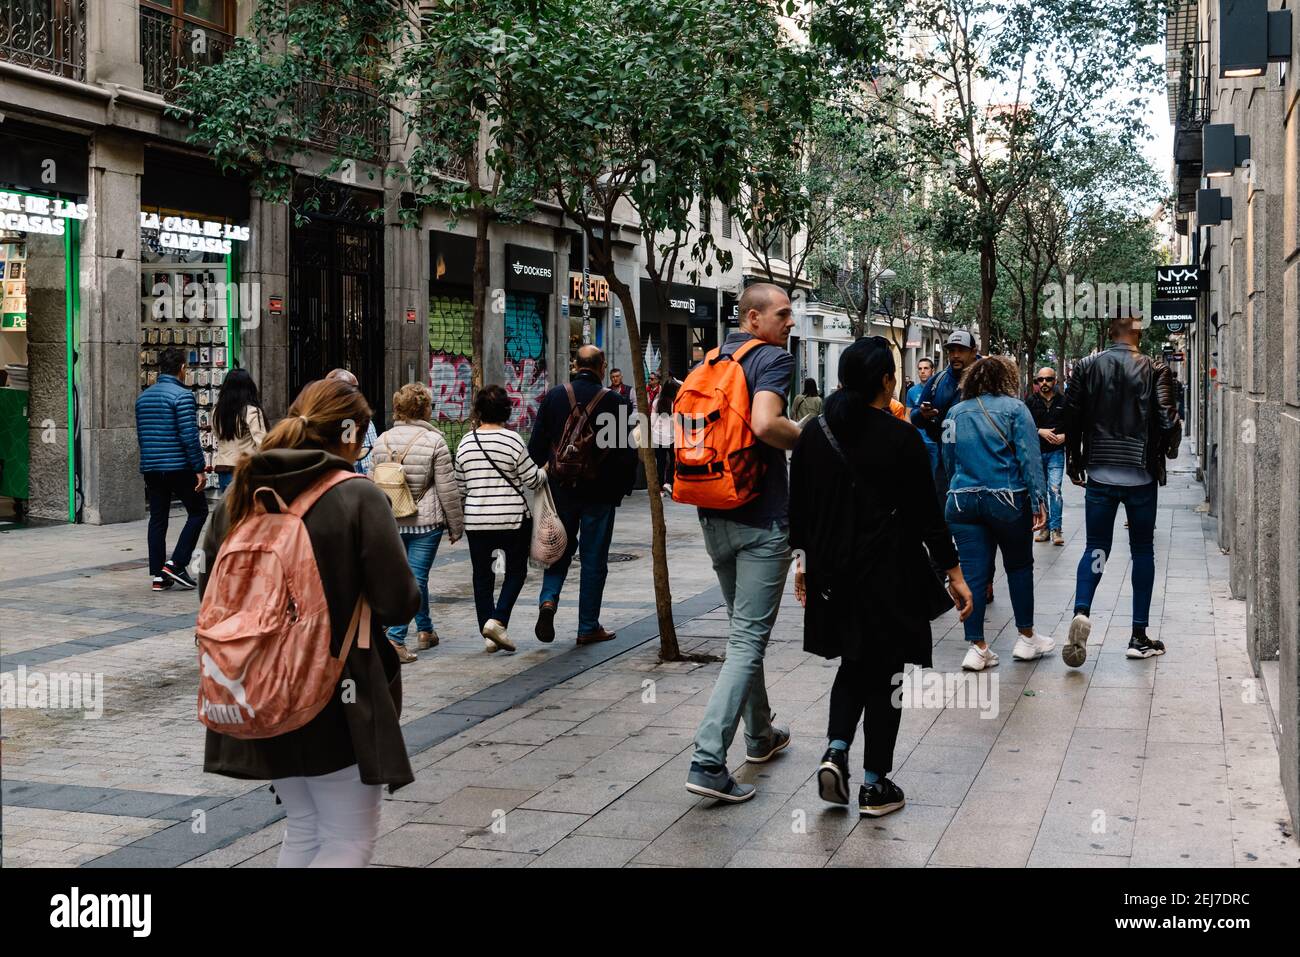 Madrid, Spain - November 1, 2019: People shopping in commercial Fuencarral Street in Central Madrid. Street scene Stock Photo